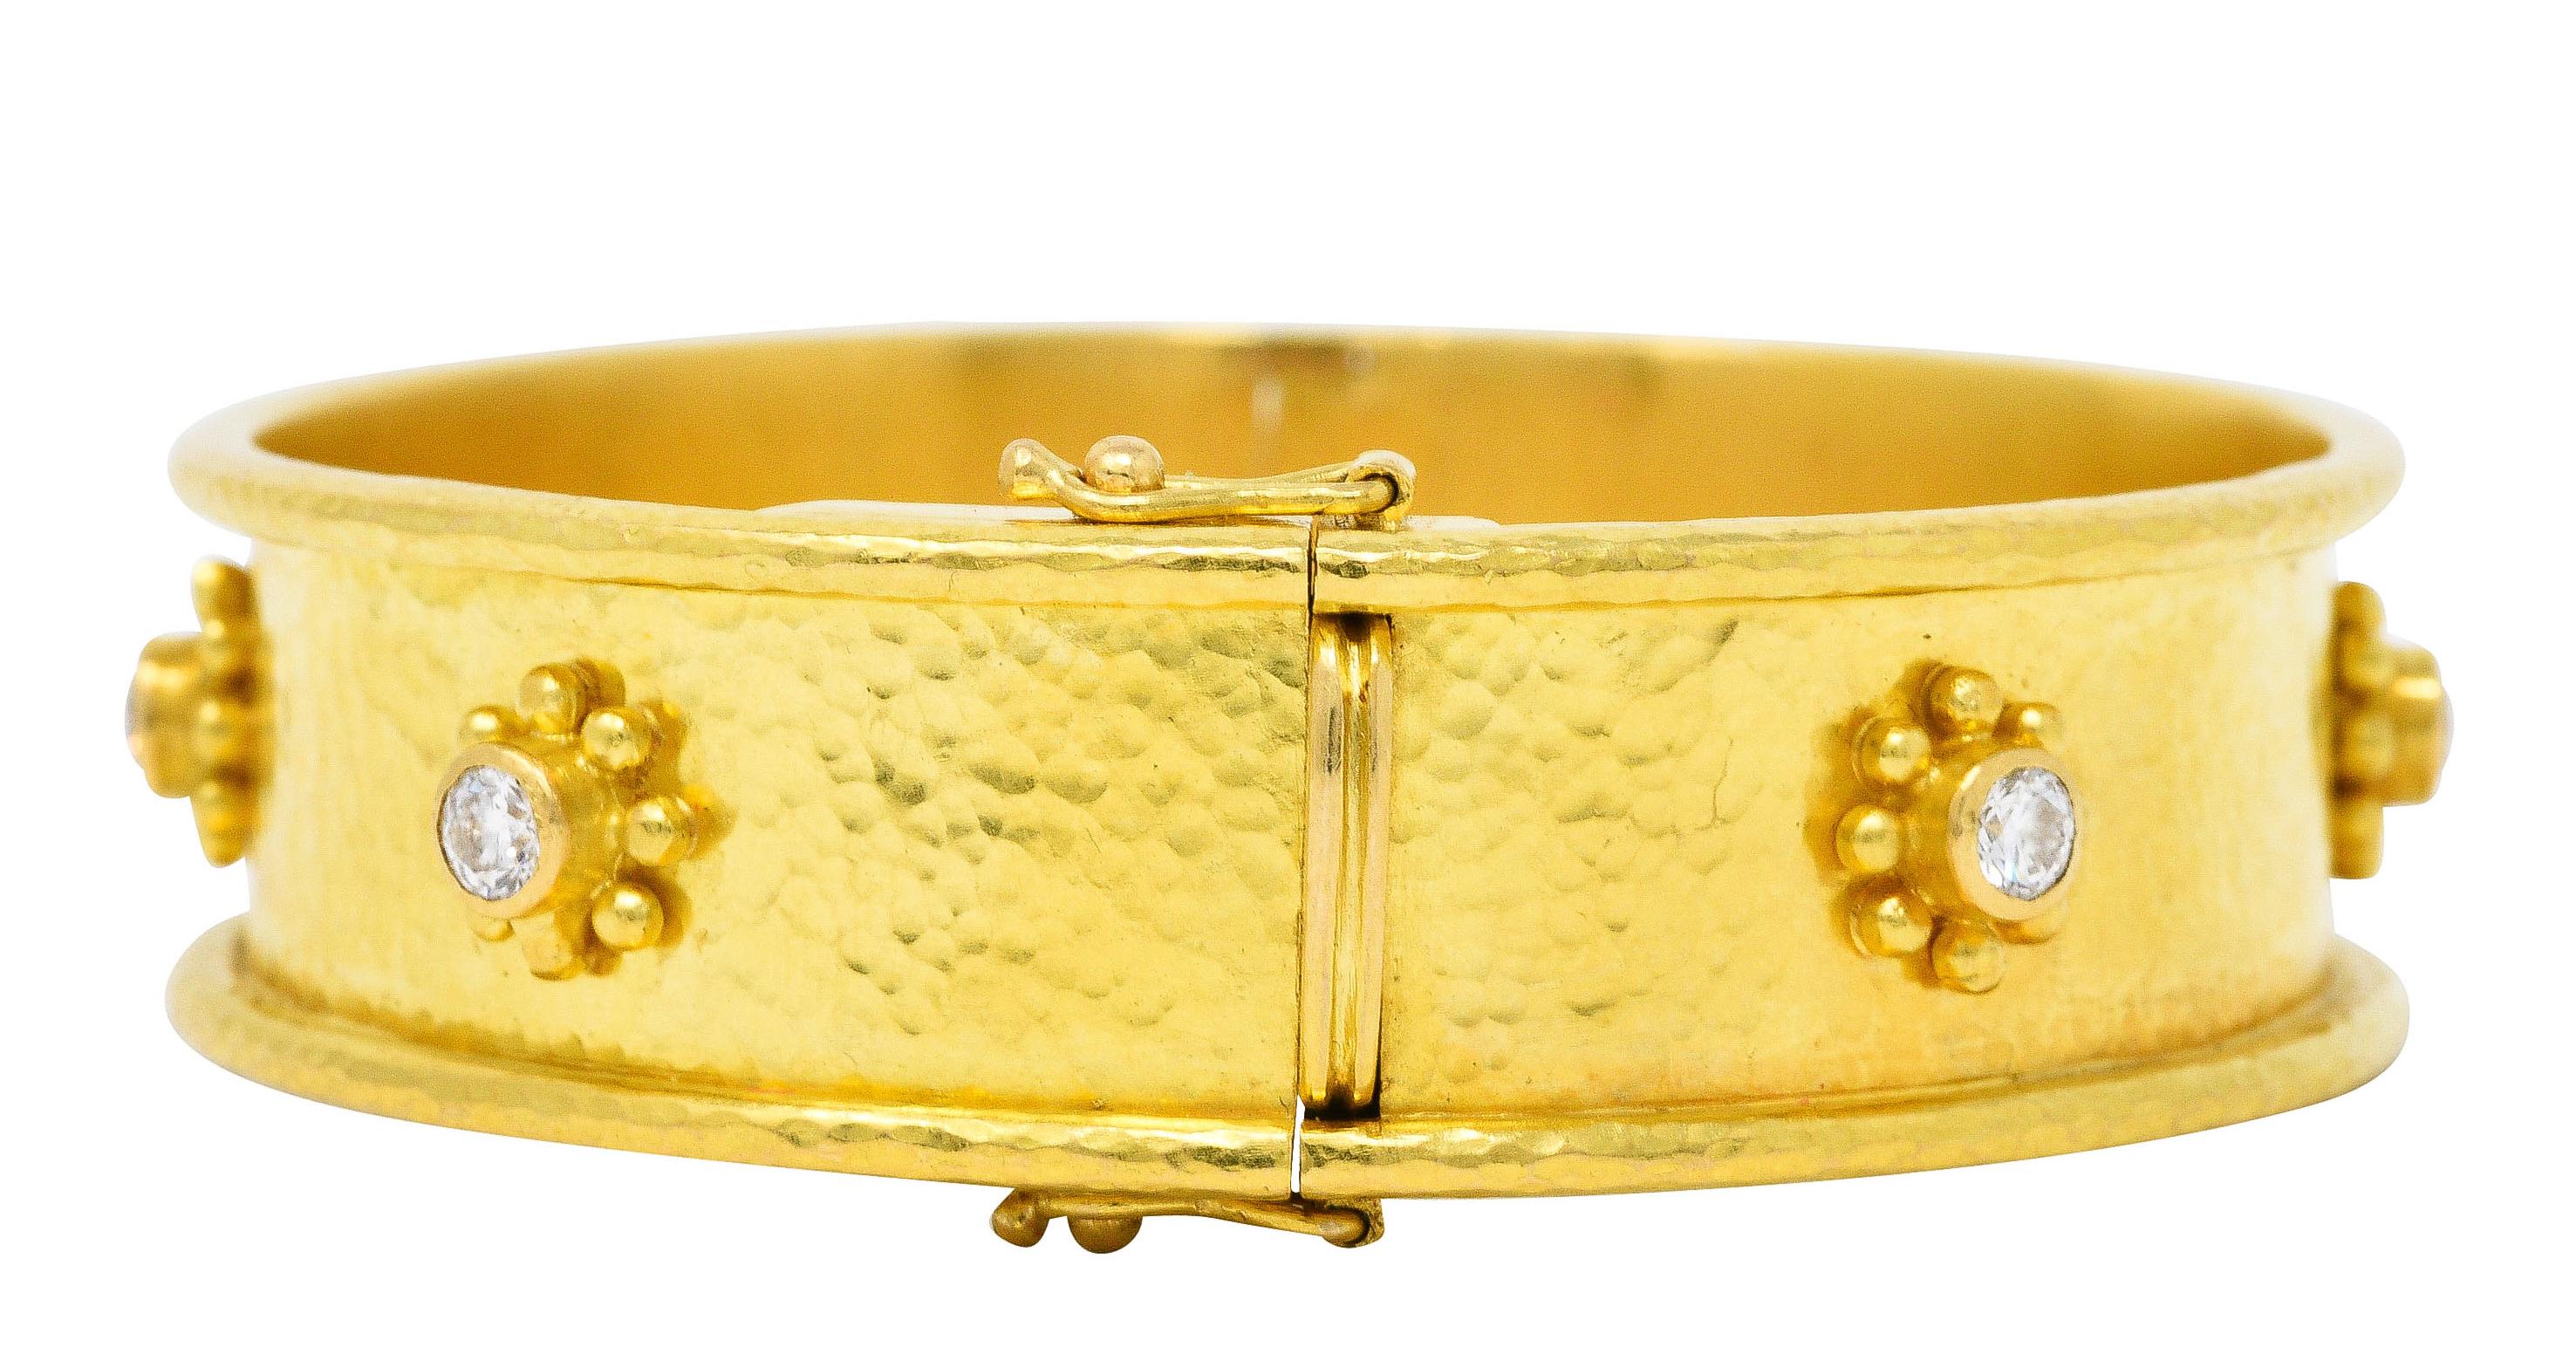 Hinged bangle bracelet has a finely hammered finish throughout

With bezel set diamond stations throughout accented by gold bead surrounds

Round brilliant cut diamonds weigh in total approximately 0.85 carat - G/H color with VS clarity

Completed